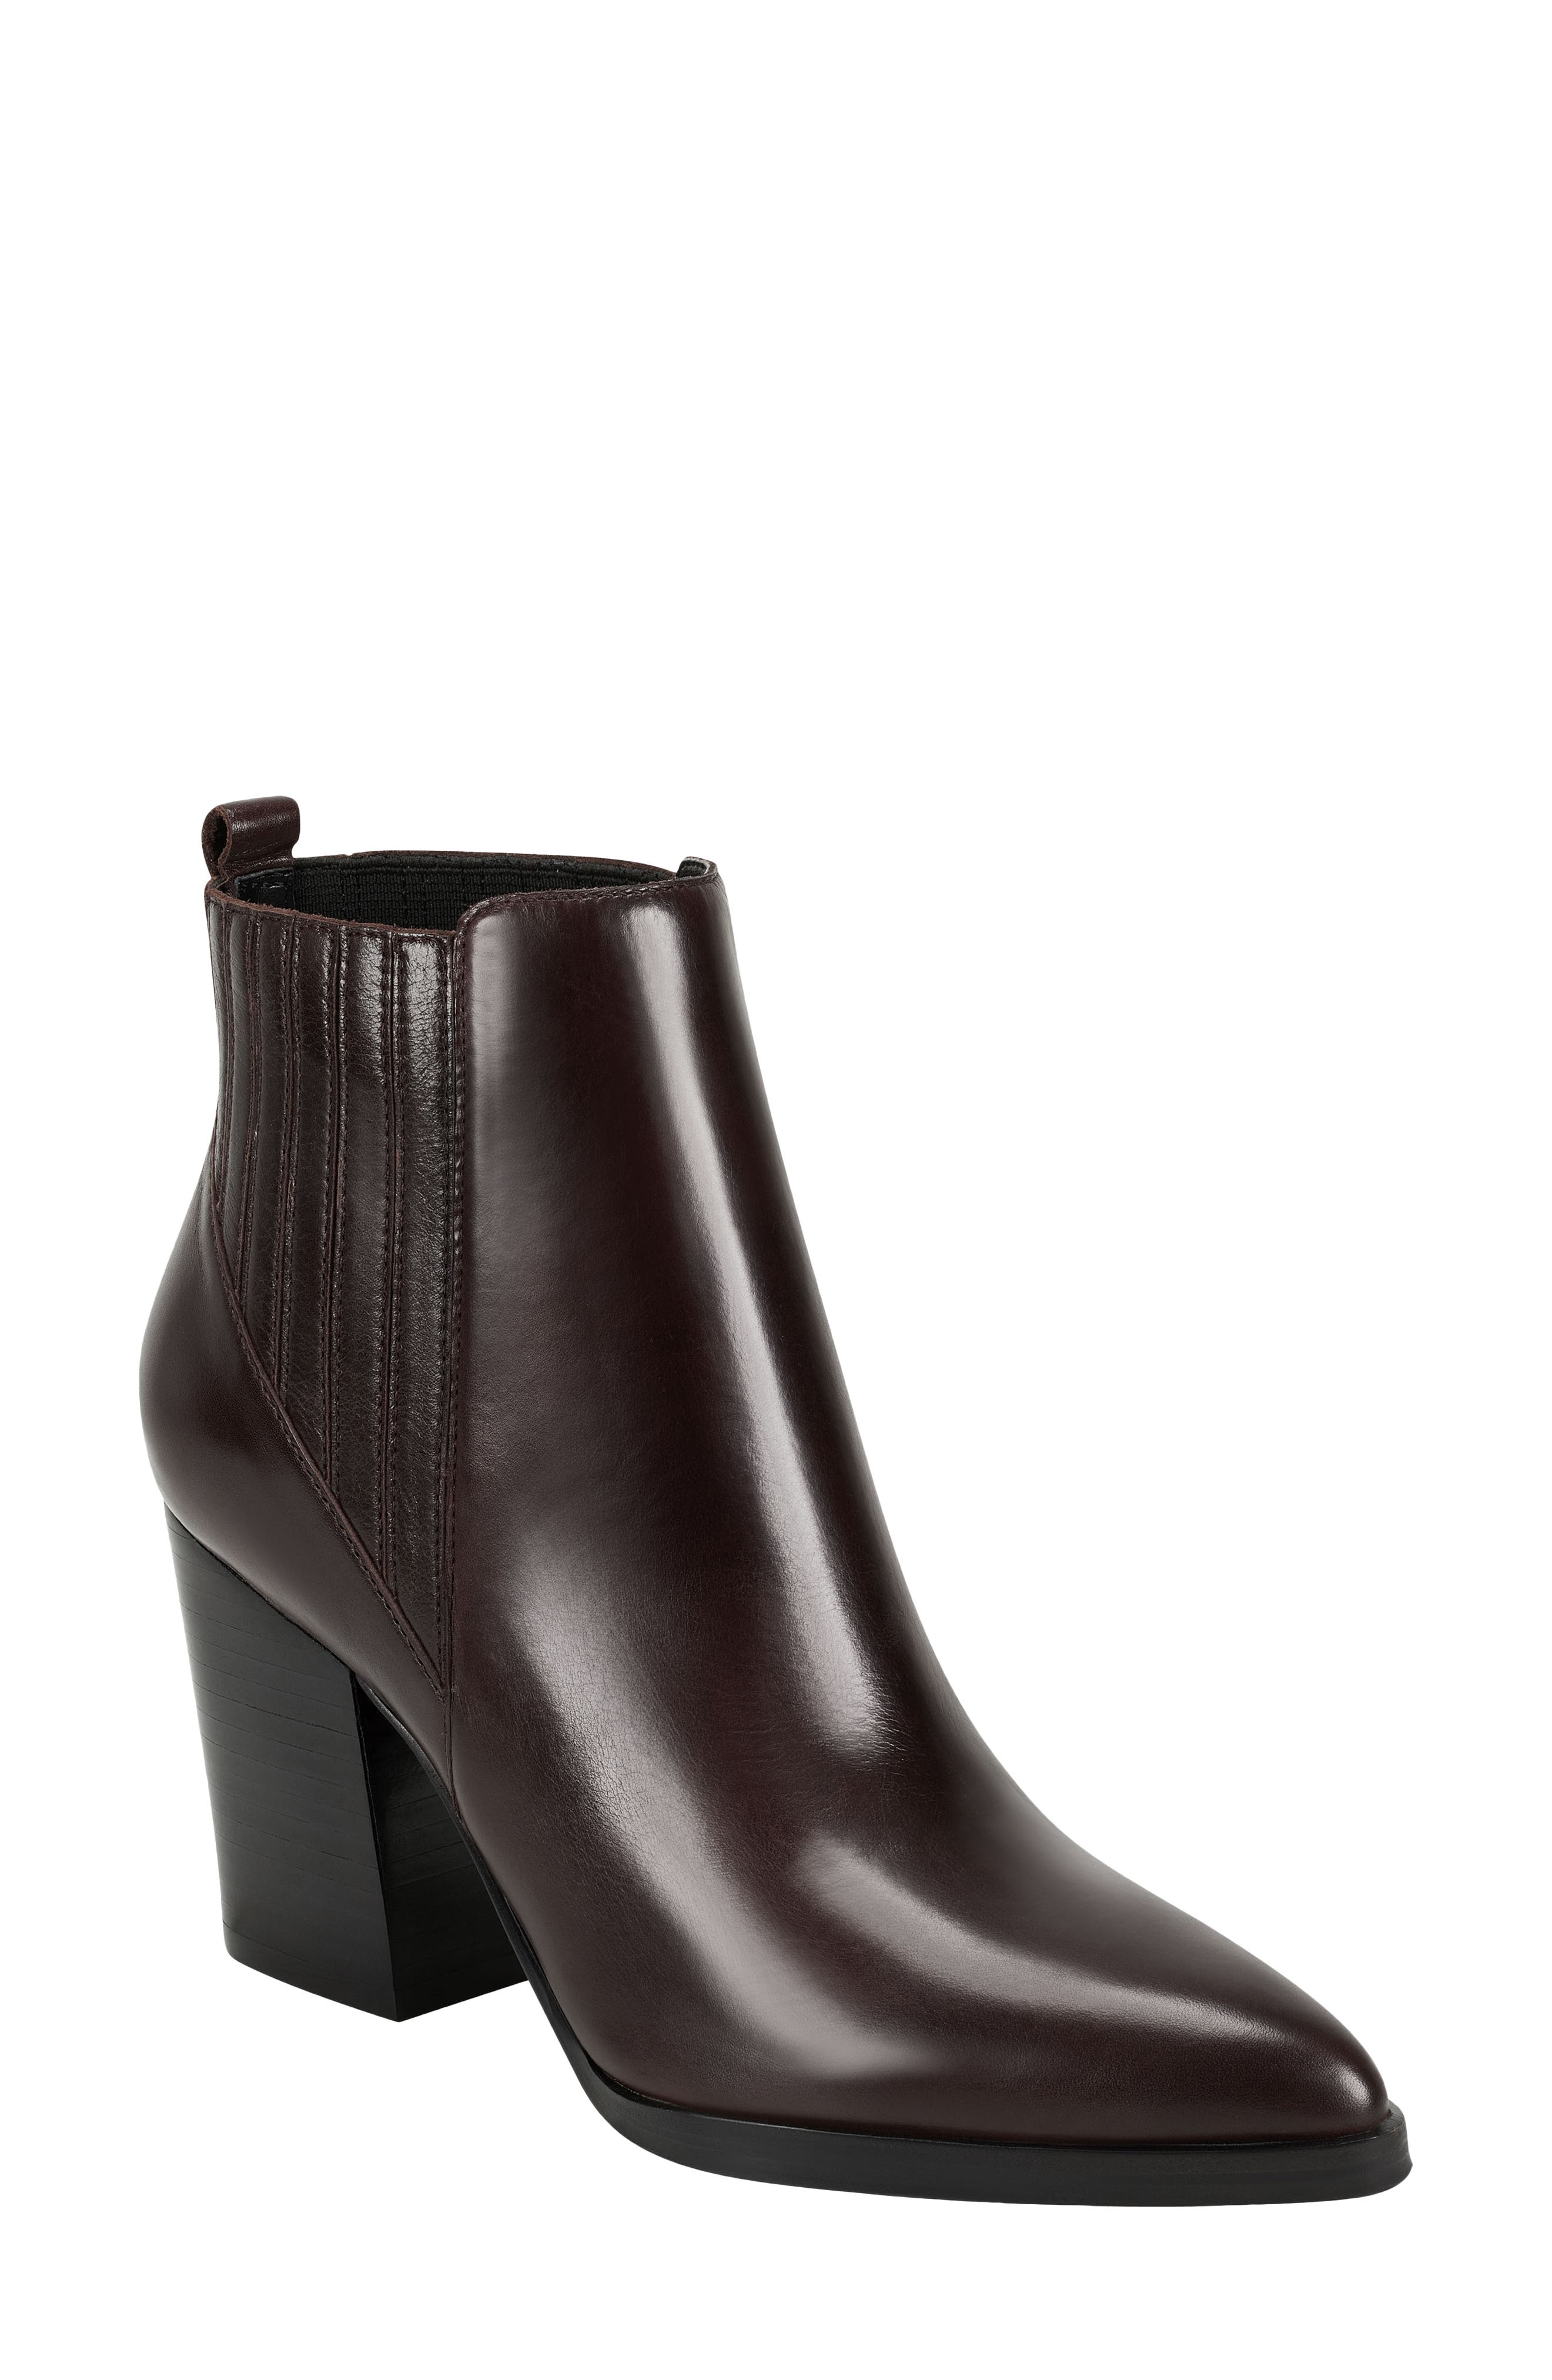 Details about  / Marc Fisher Brown Leather Novice Peep-toe Ankle Bootie NEW